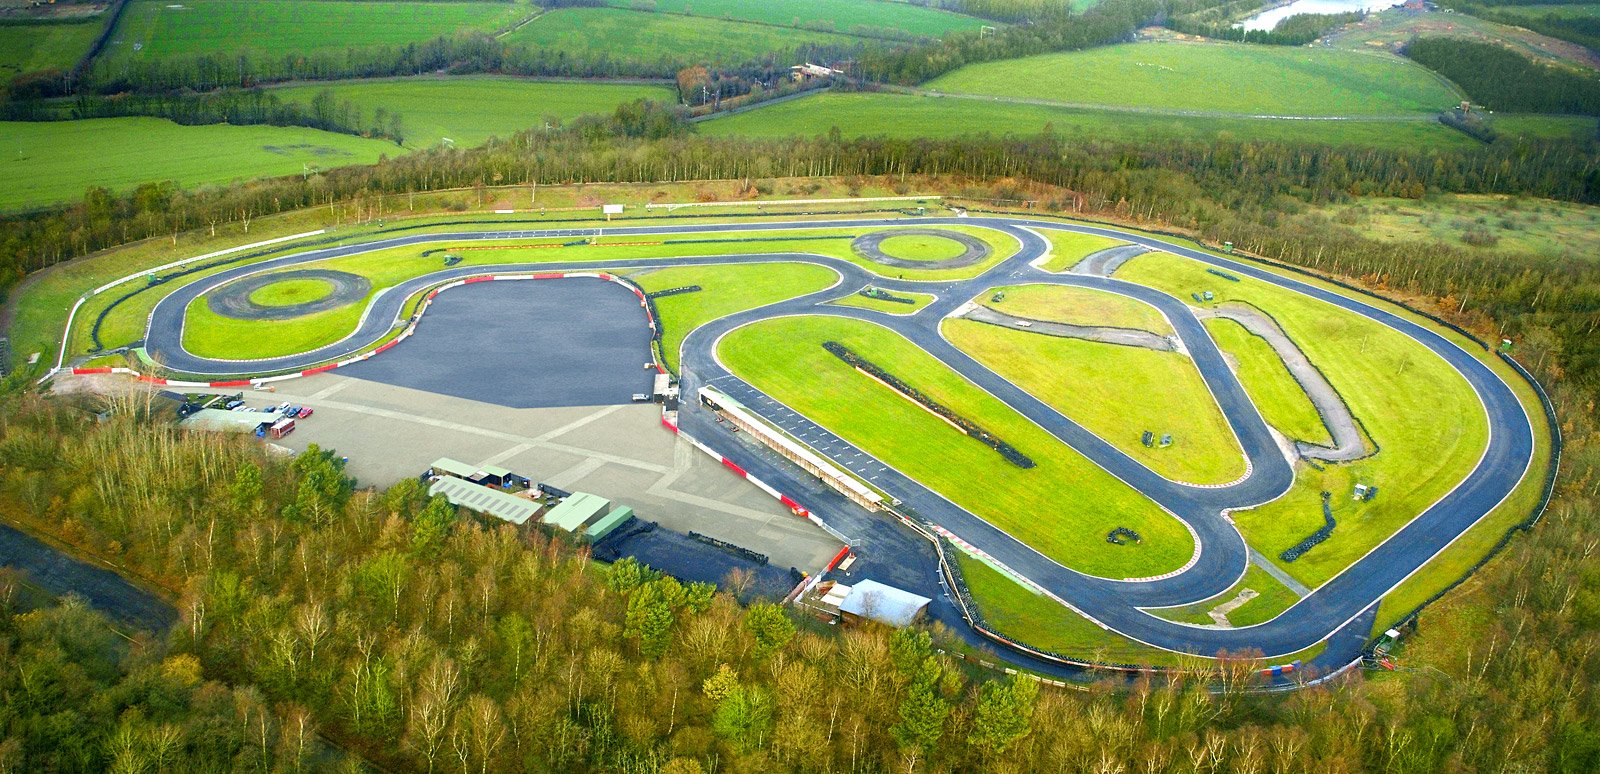 Three Sisters Karting near Manchester